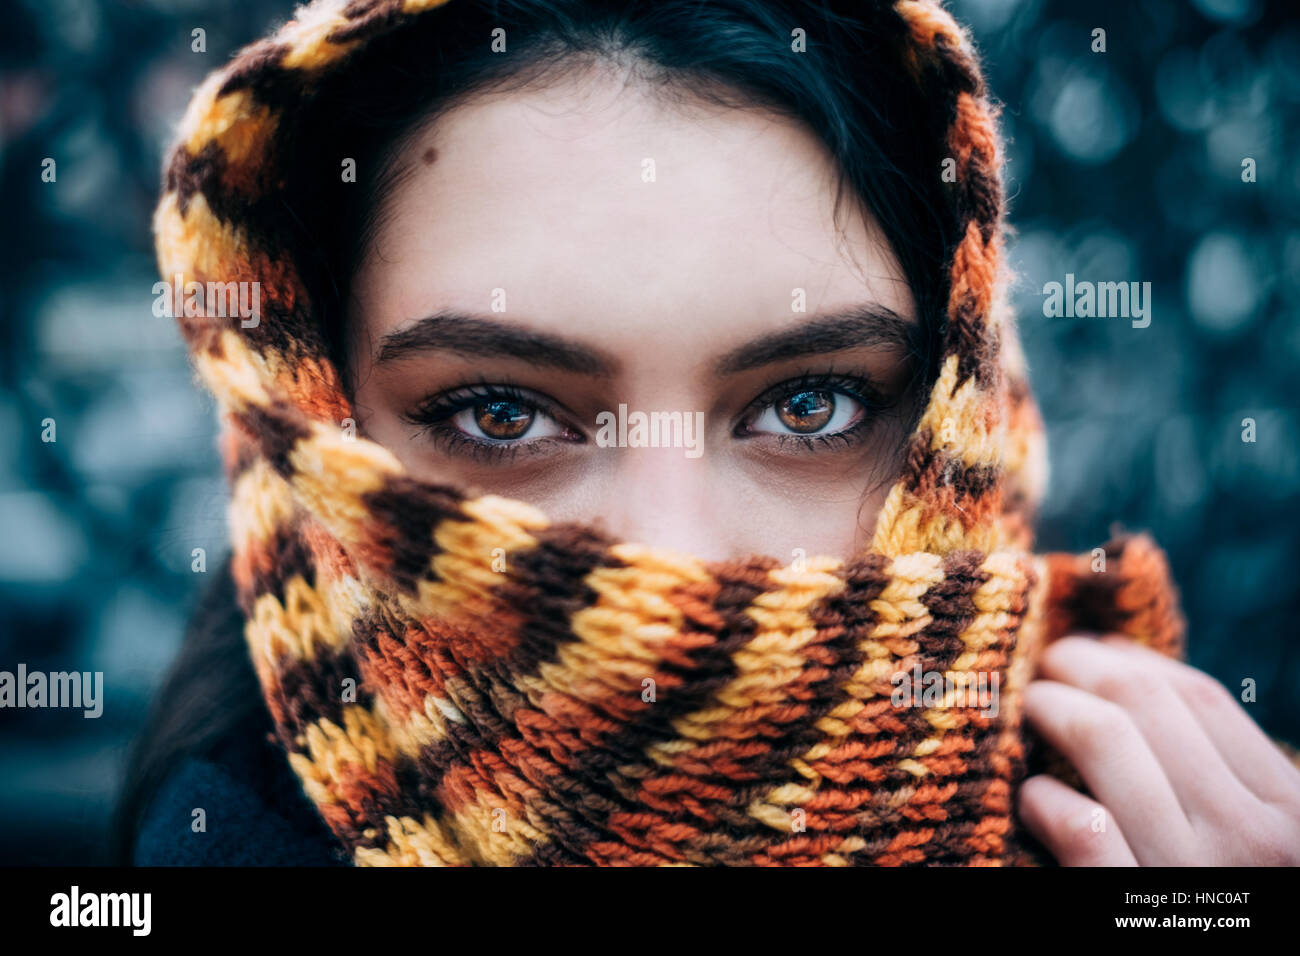 Woman with a scarf wrapped around her head Stock Photo